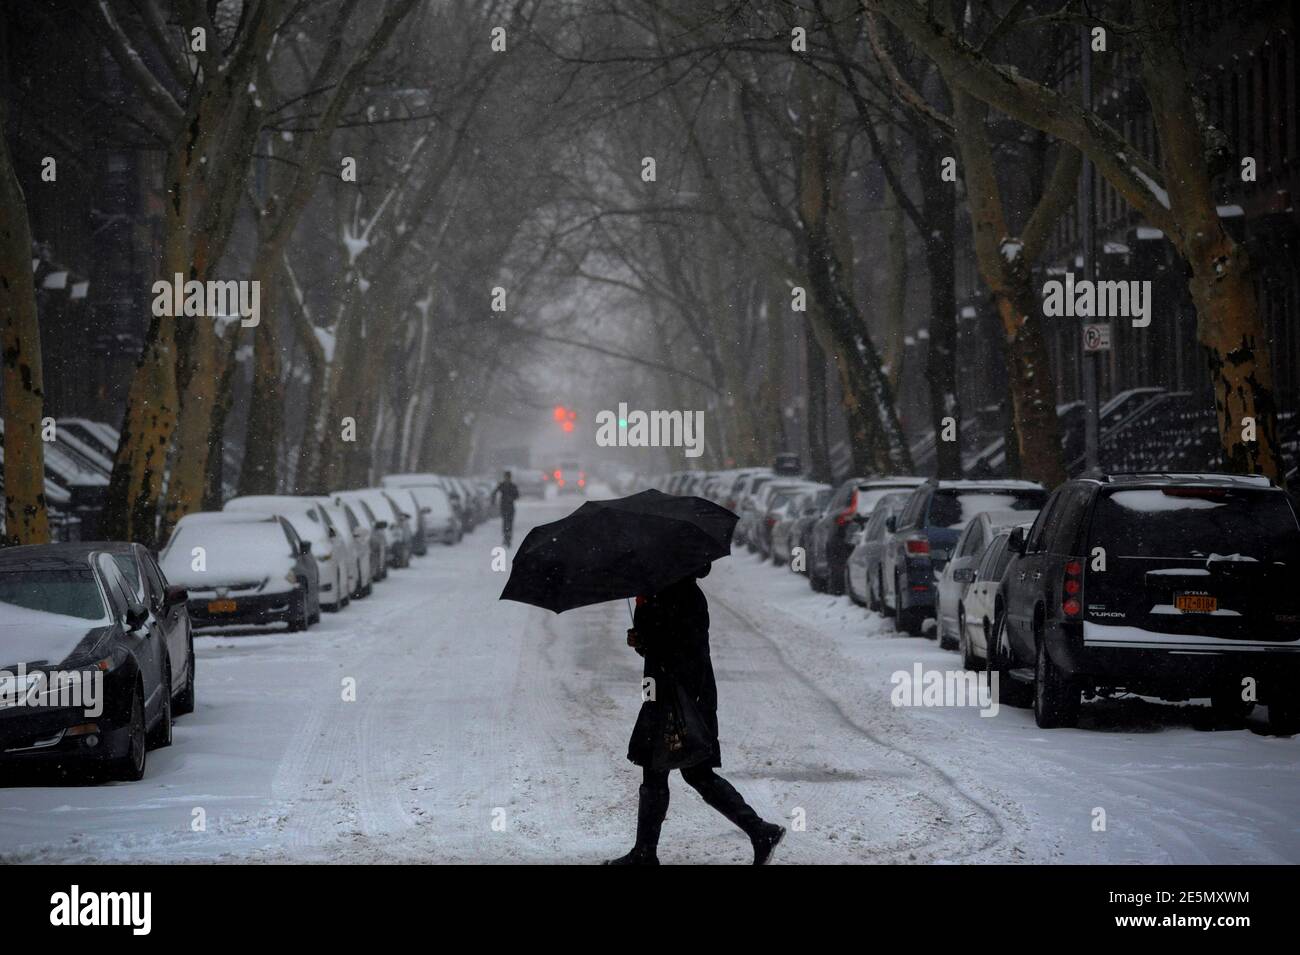 A woman walks beneath an umbrella in falling snow in the Fort Greene section of downtown Brooklyn in New York City January 26, 2015. The National Weather Service (NWS) issued a blizzard warning for New York City and surrounding areas on Monday, and warned of two days of winter storms across the East Coast, from Pennsylvania to Maine. REUTERS/Stephanie Keith    (UNITED STATES - Tags: ENVIRONMENT) Stock Photo